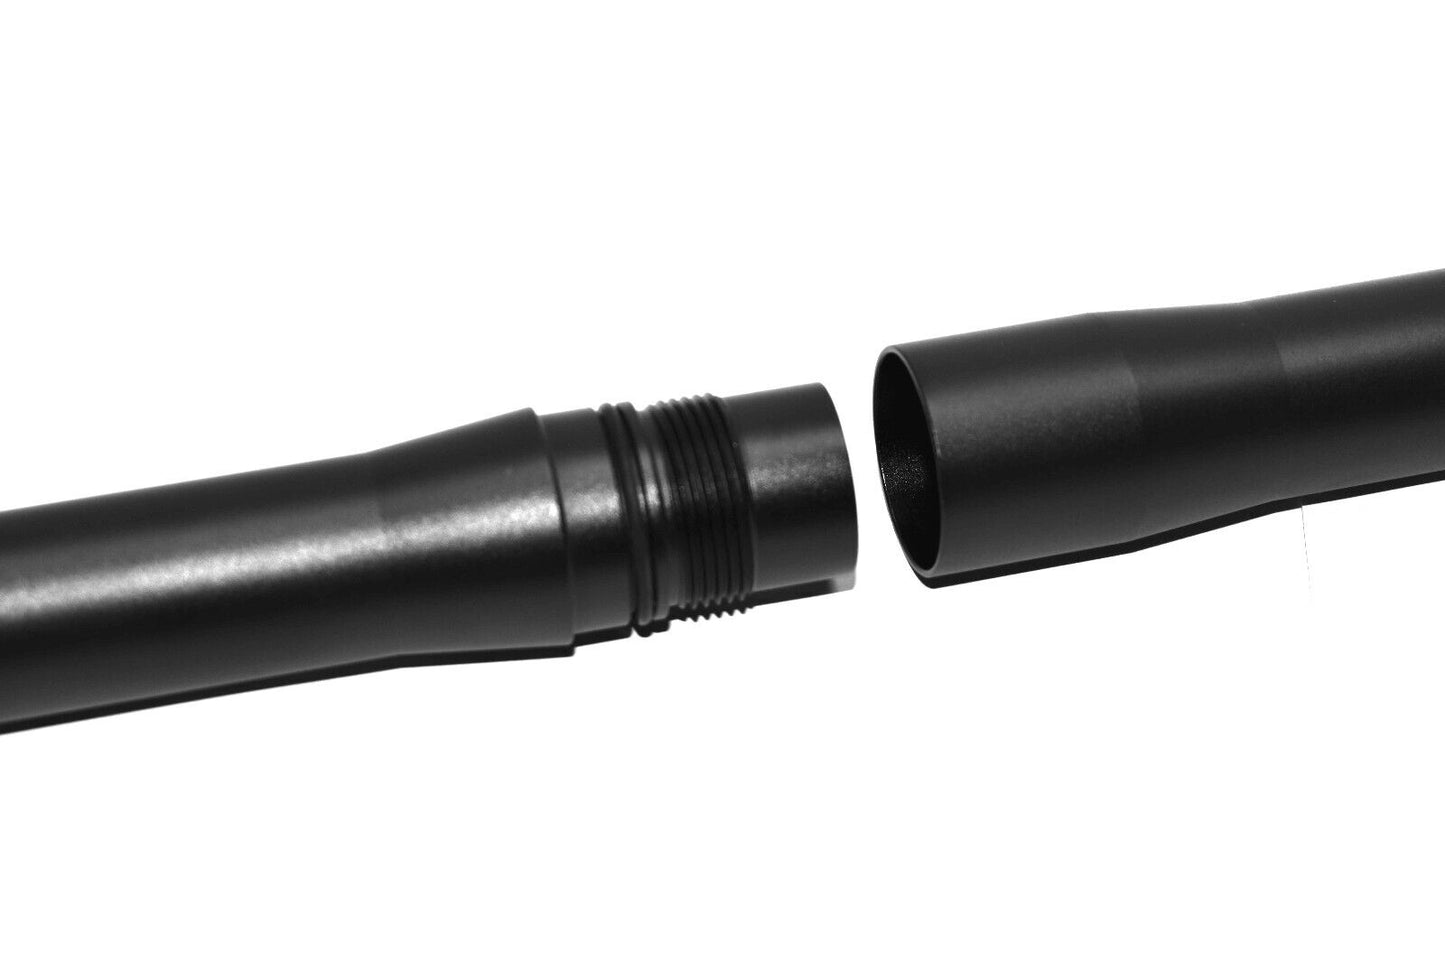 Trinity tactical barrel 16 inches long compatible with Tippmann Stormer paintball marker.